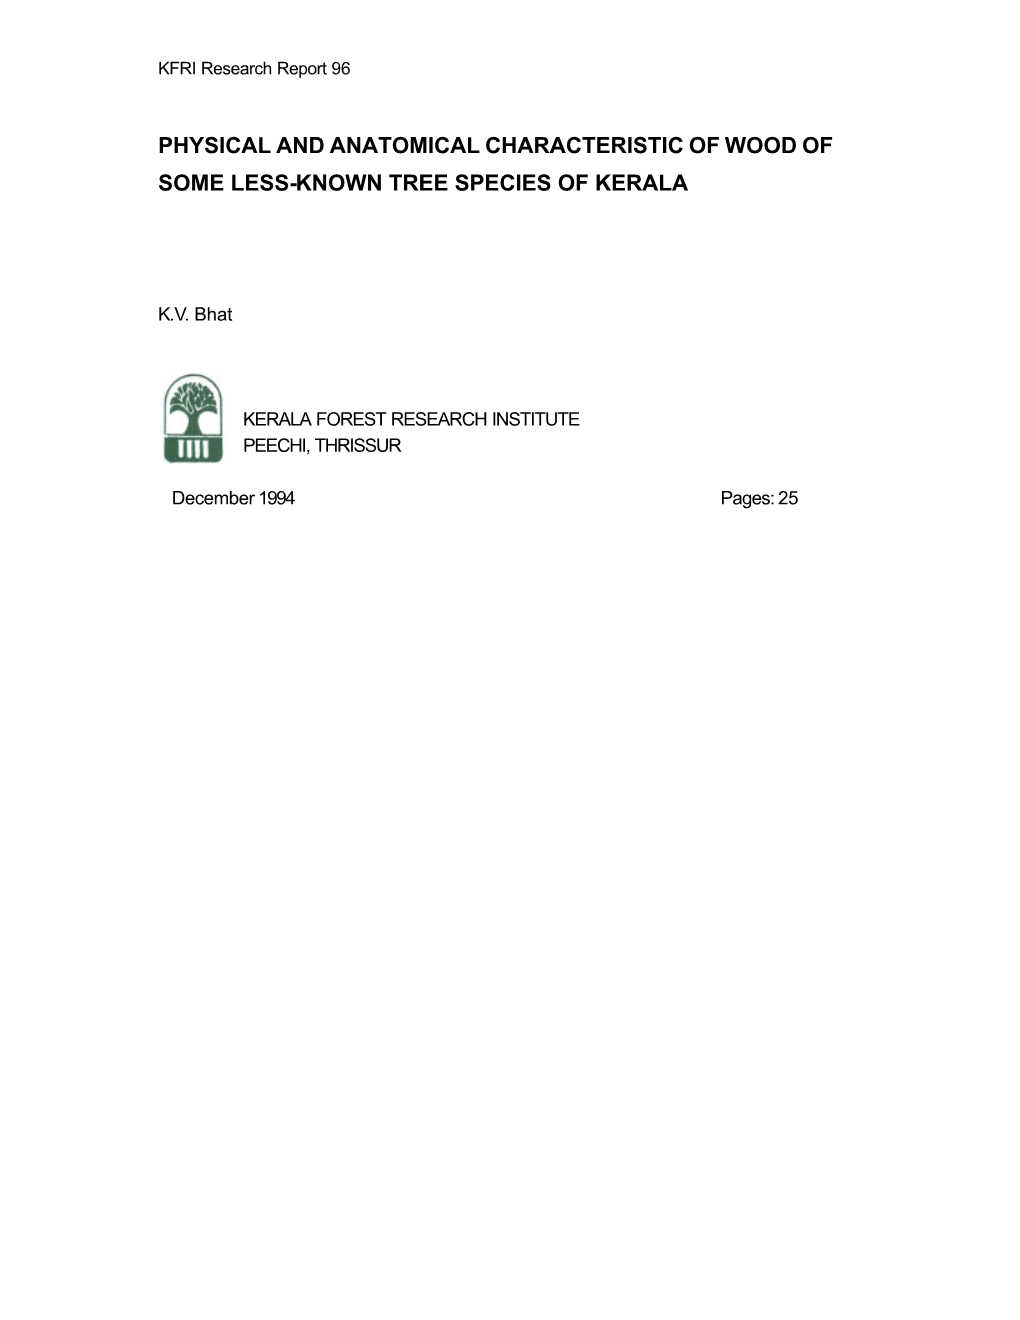 Physical and Anatomical Characteristic of Wood of Some Less-Known Tree Species of Kerala